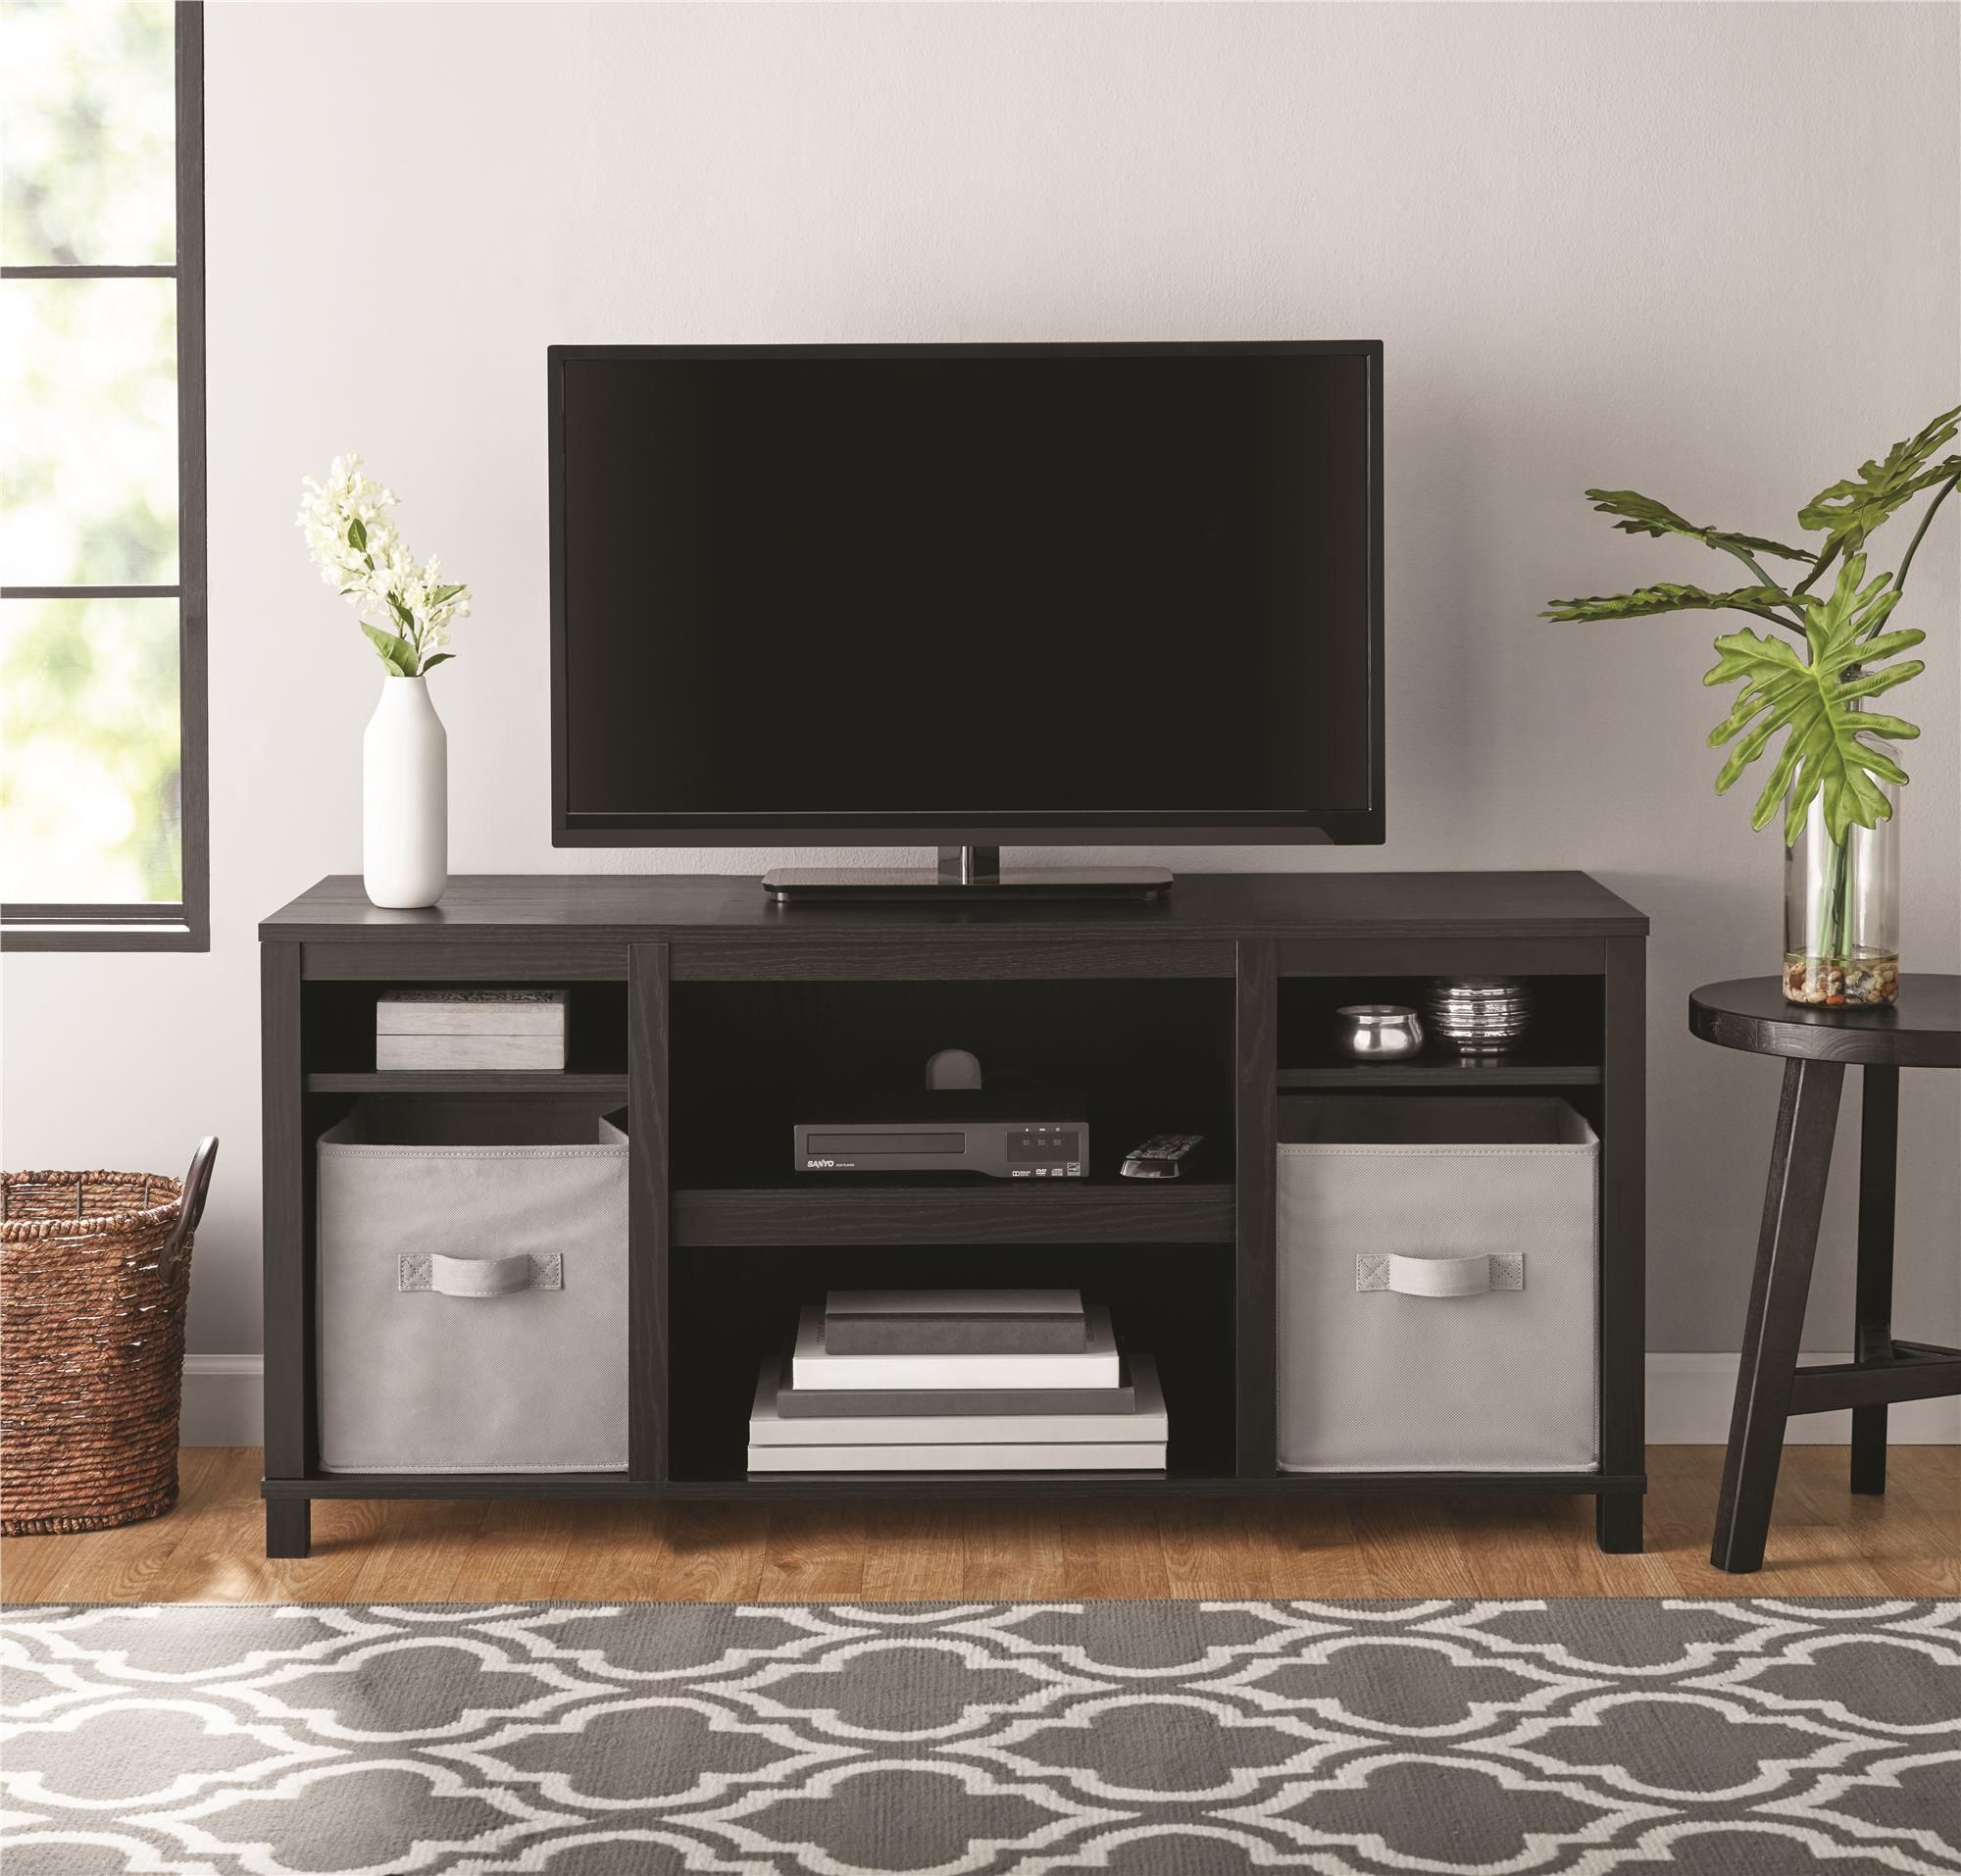 Mainstays Parsons Tv Stand For Tvs Up To 50", True Black Throughout Tv Mount And Tv Stands For Tvs Up To 65" (View 11 of 15)